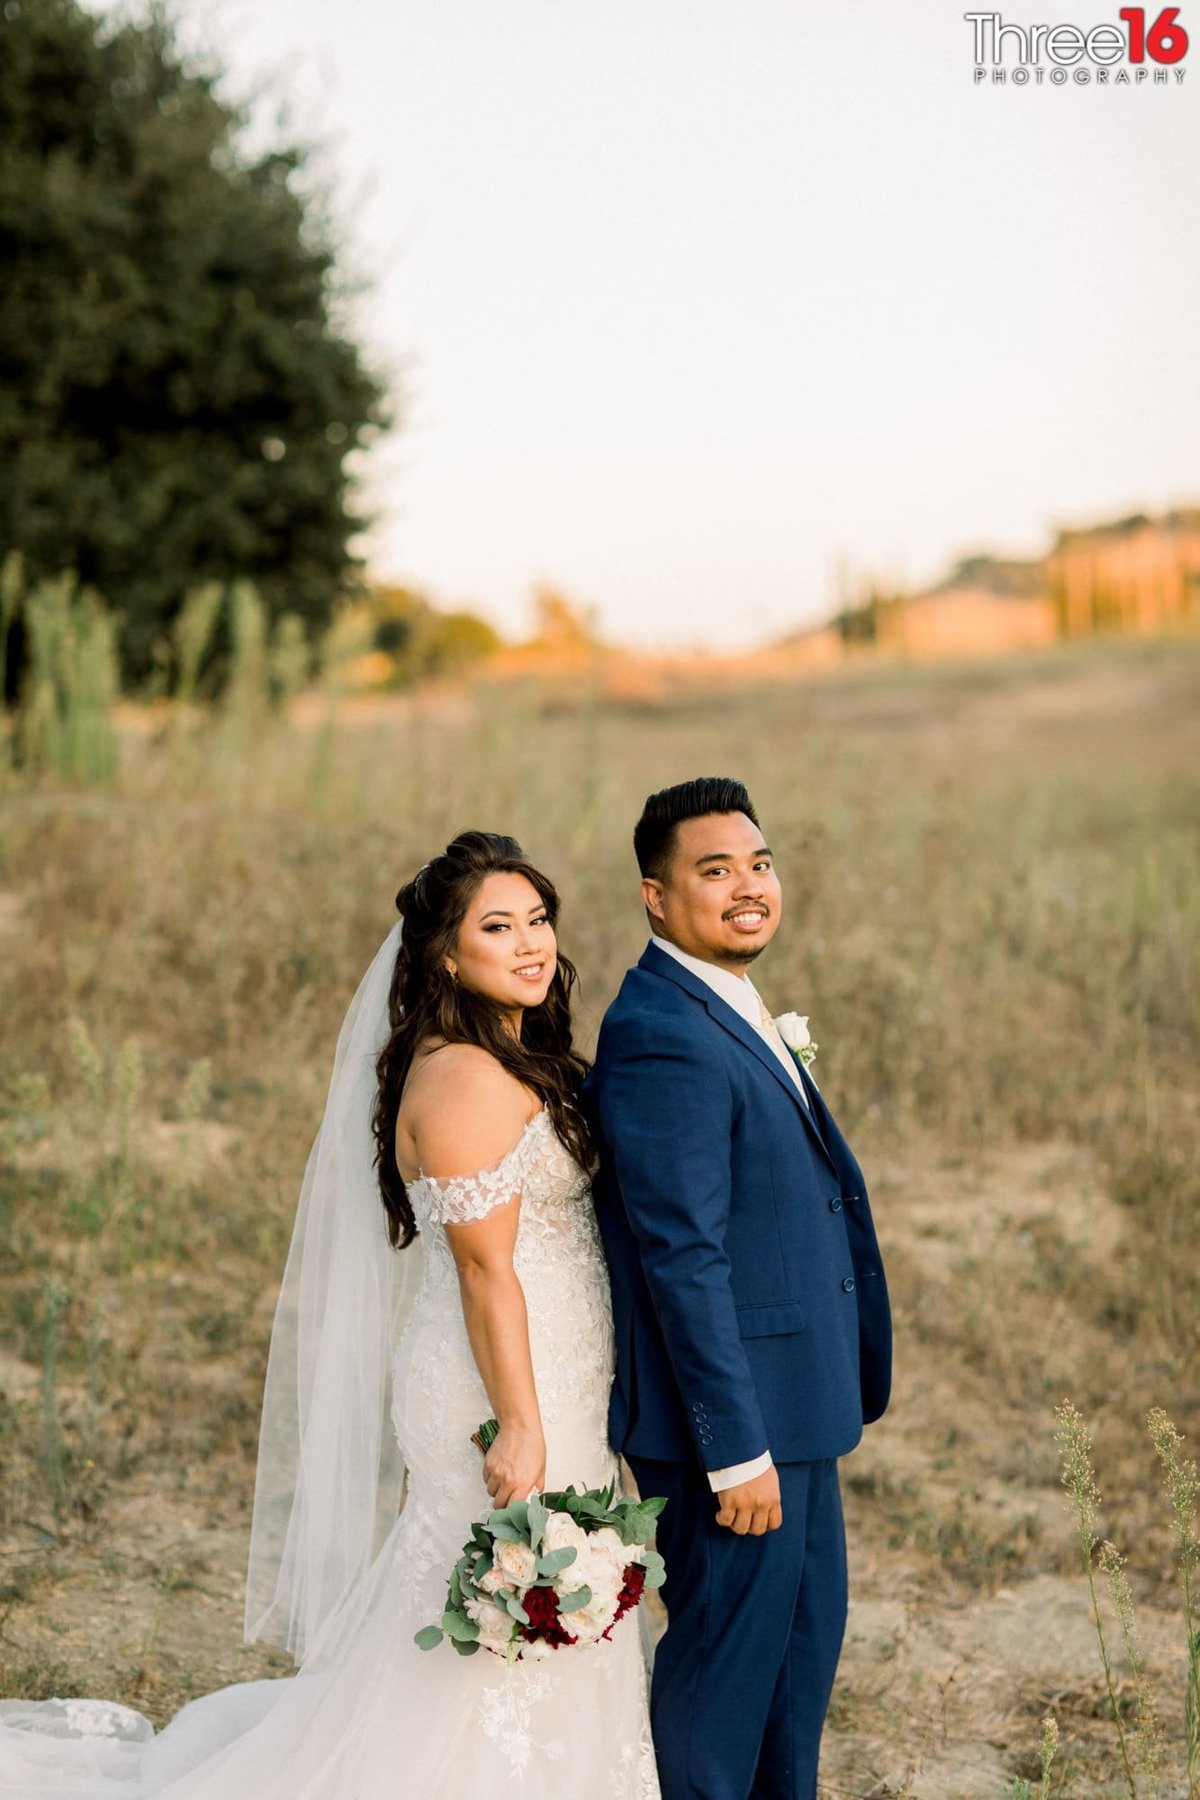 Bride poses for photos behind her Groom in an open field at the Wedgewood Vellano wedding venue